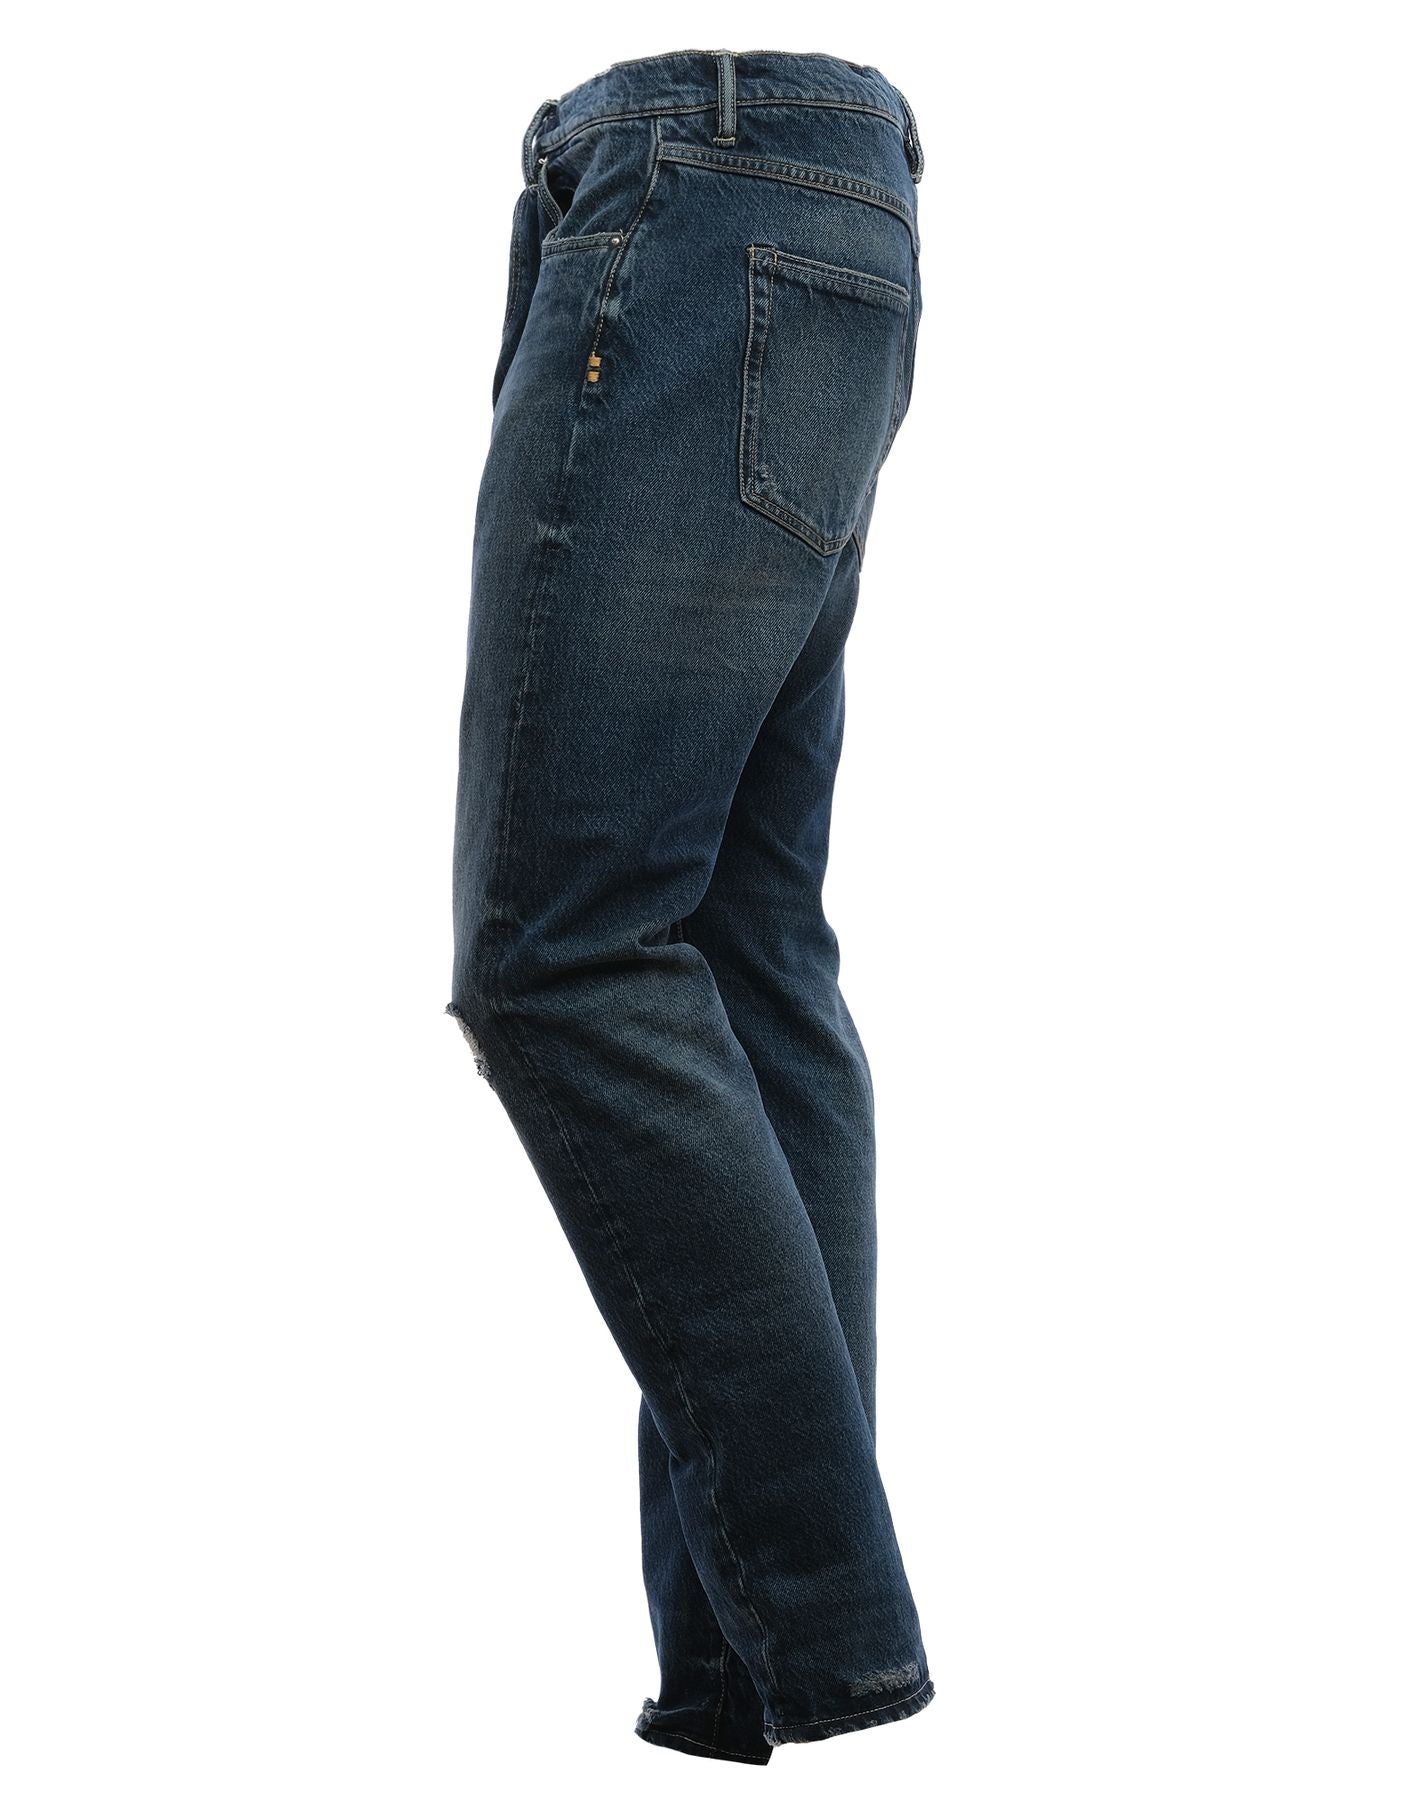 Jeans man NINE IN THE MORNING TAPPARED DLL9173